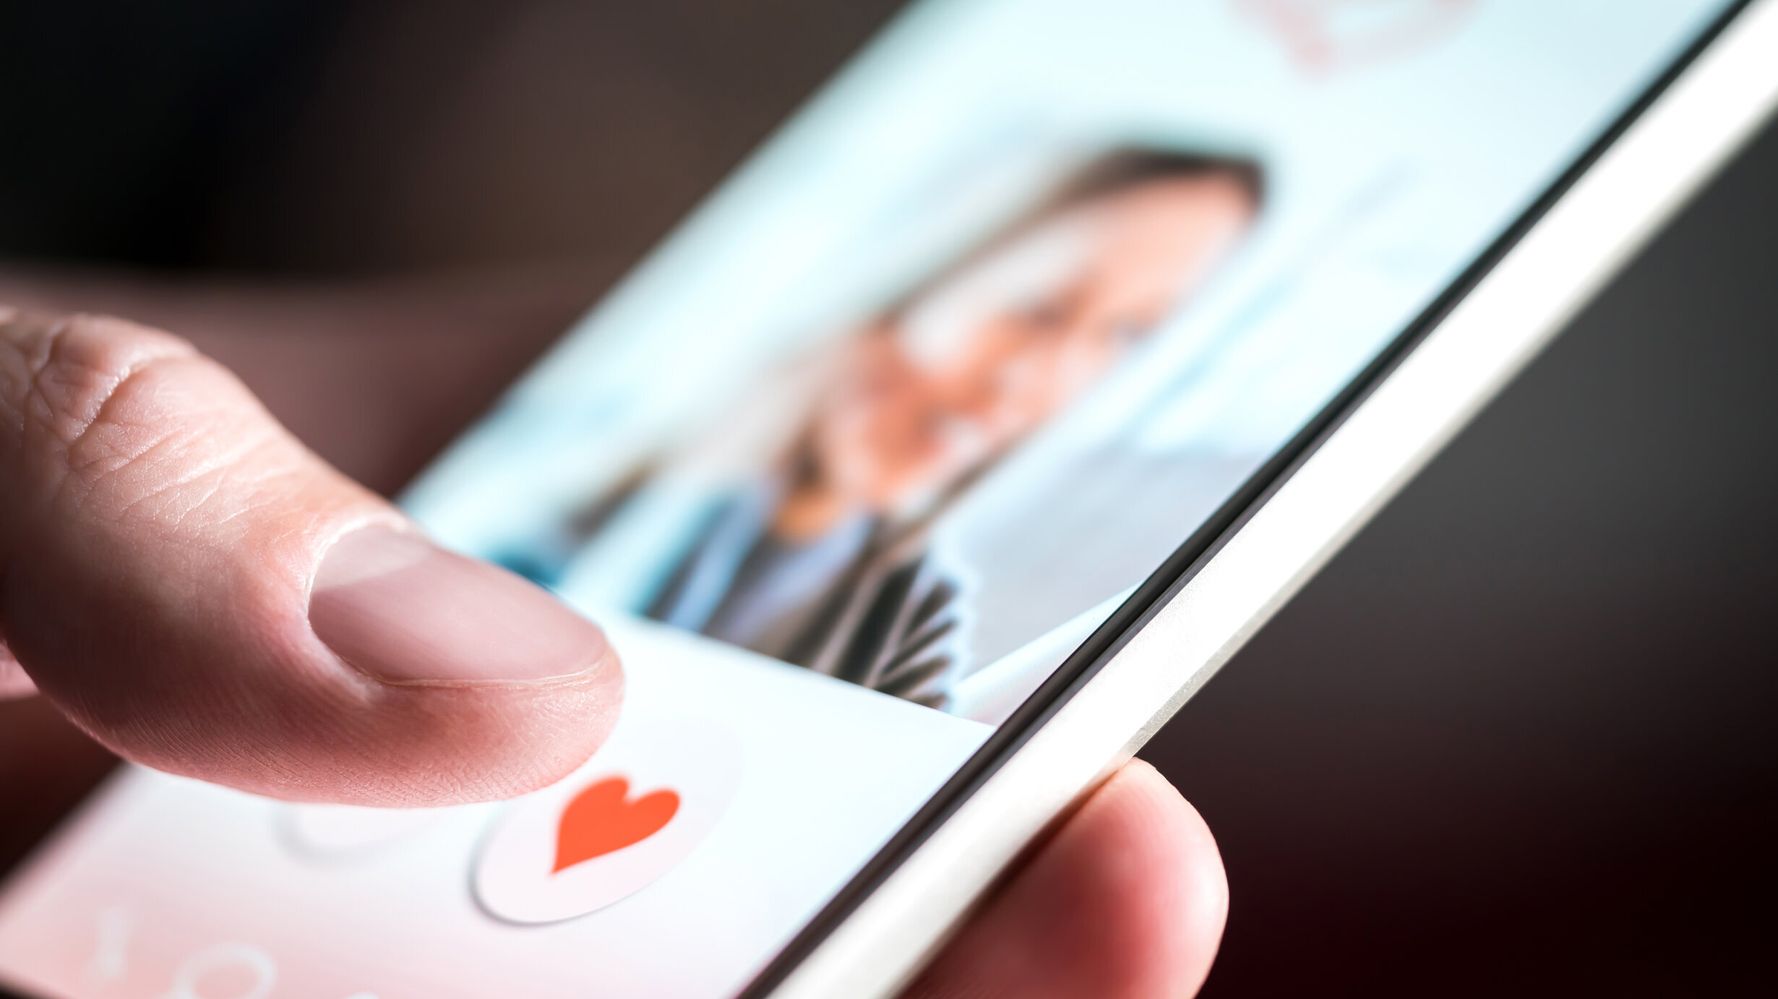 Top 5 Tinder Scams to Look Out For